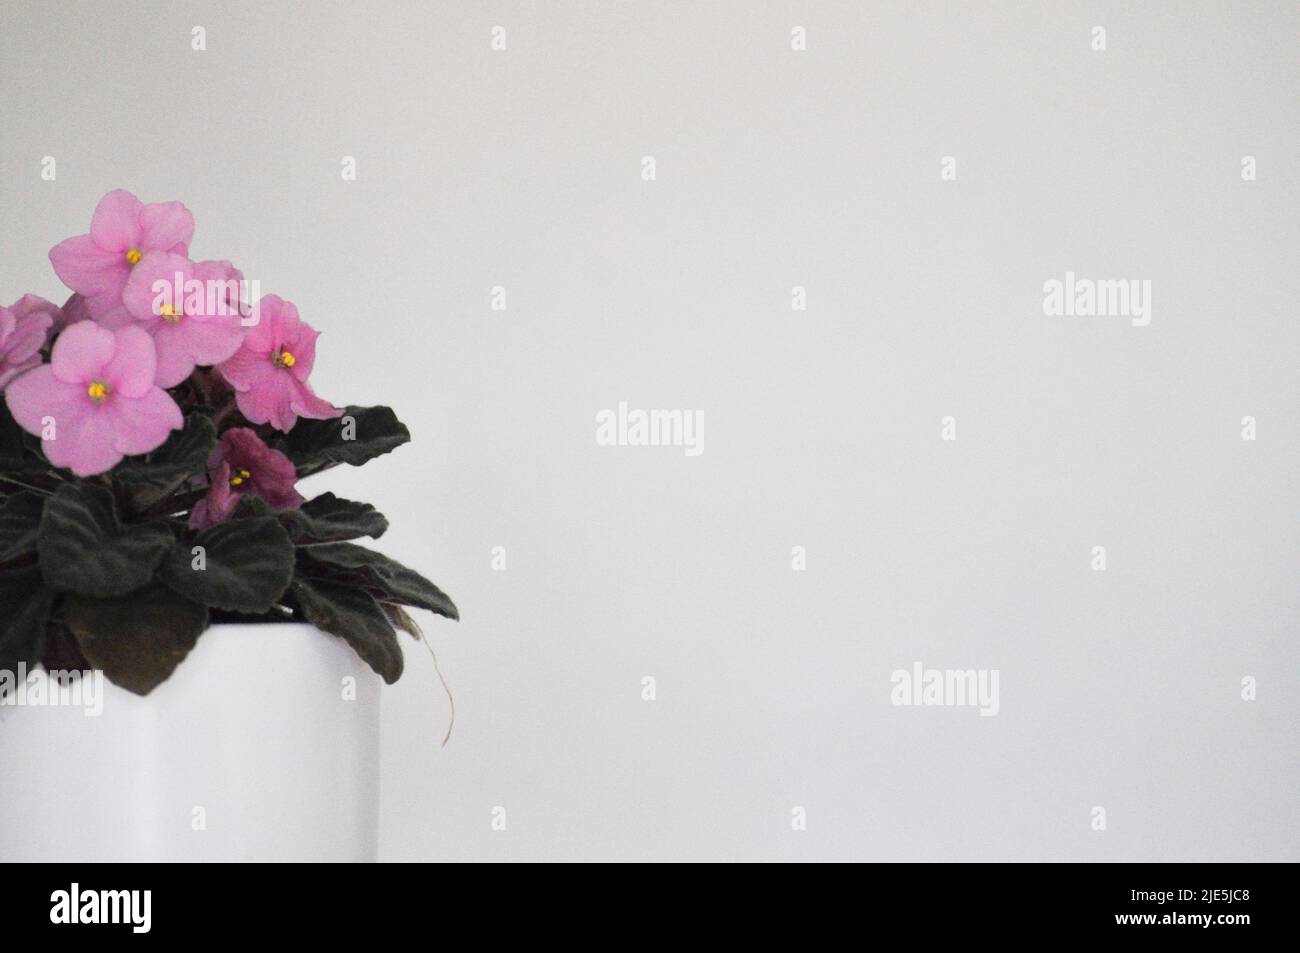 A studio shot of a pink African Violet (Saintpaulia sp.) house plant in a white plant pot, set against a white background. Stock Photo